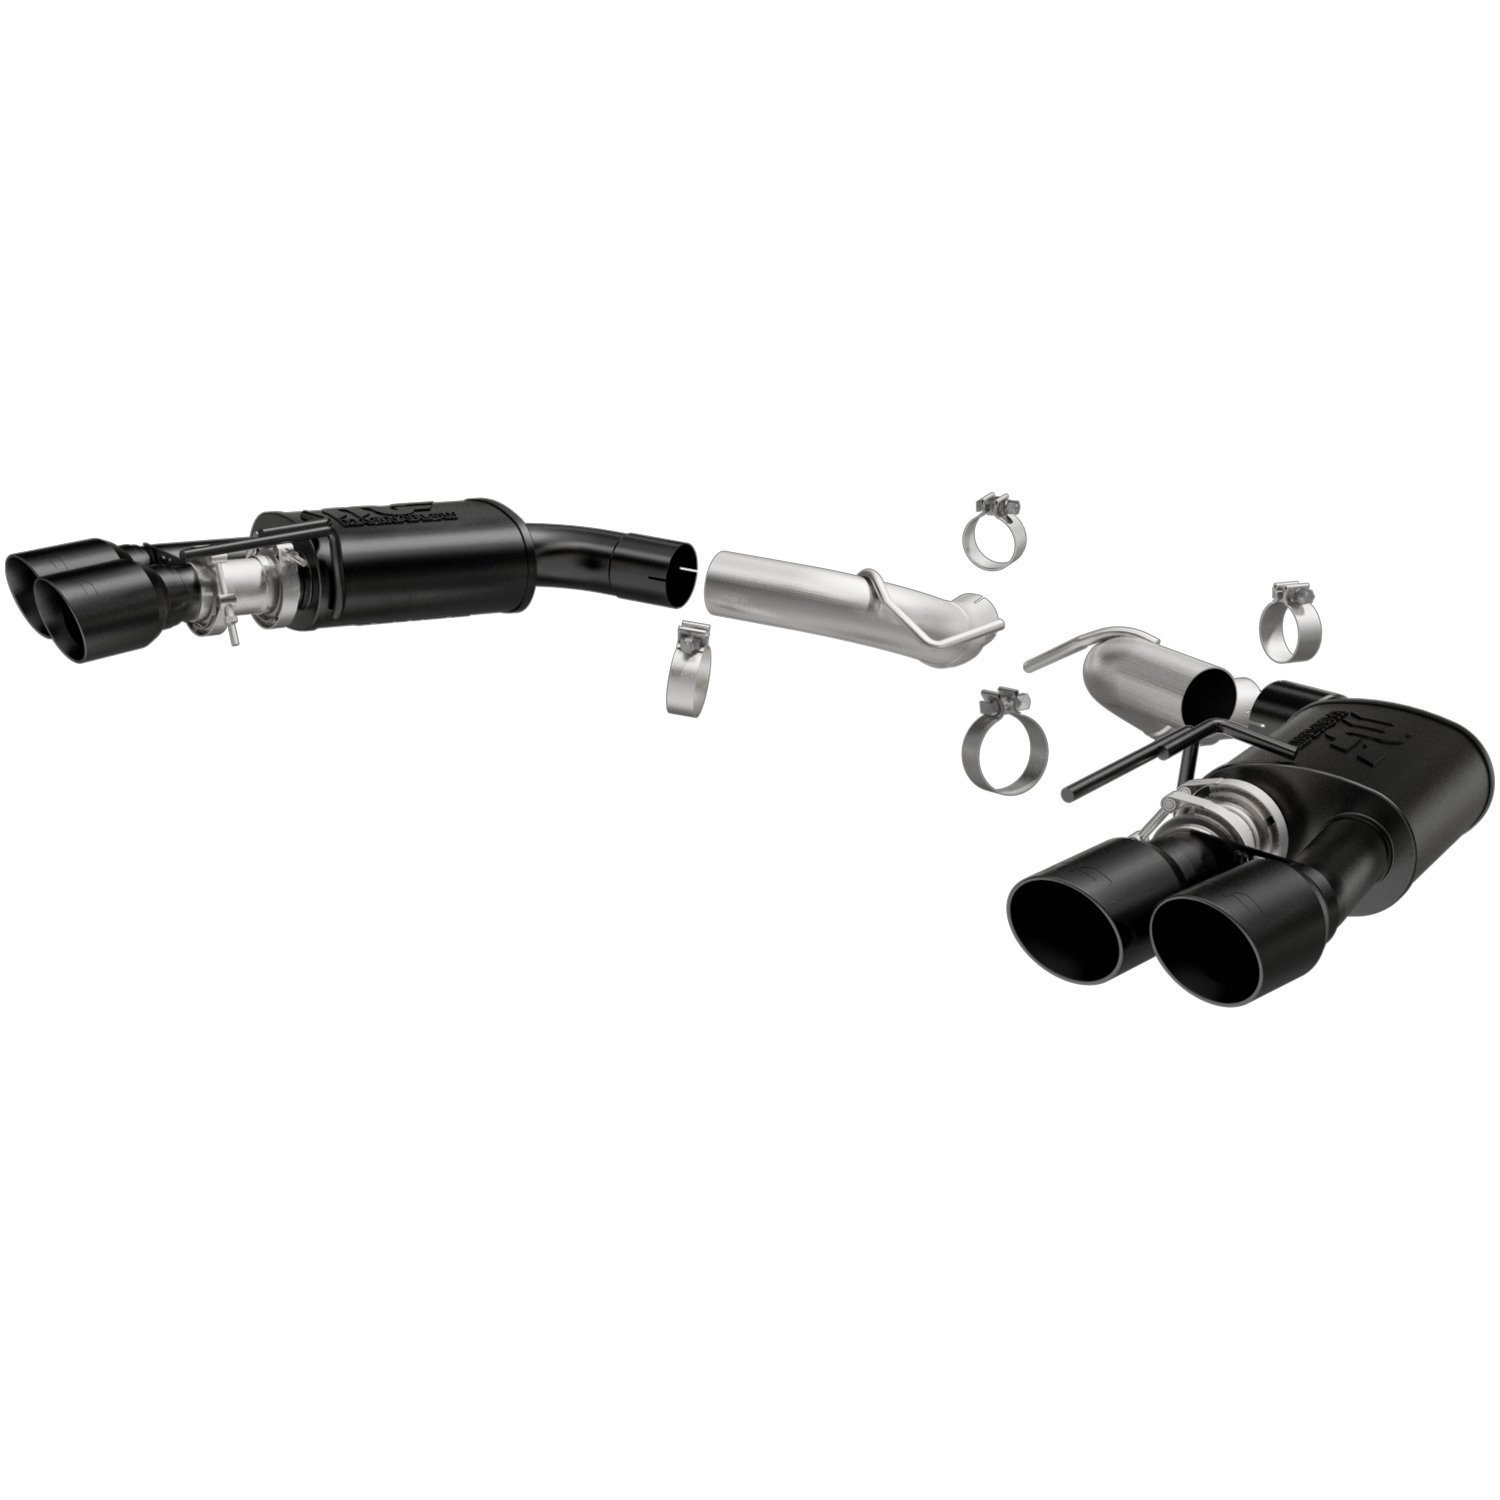 2018-2022 Ford Mustang Competition Series Axle-Back Performance Exhaust System